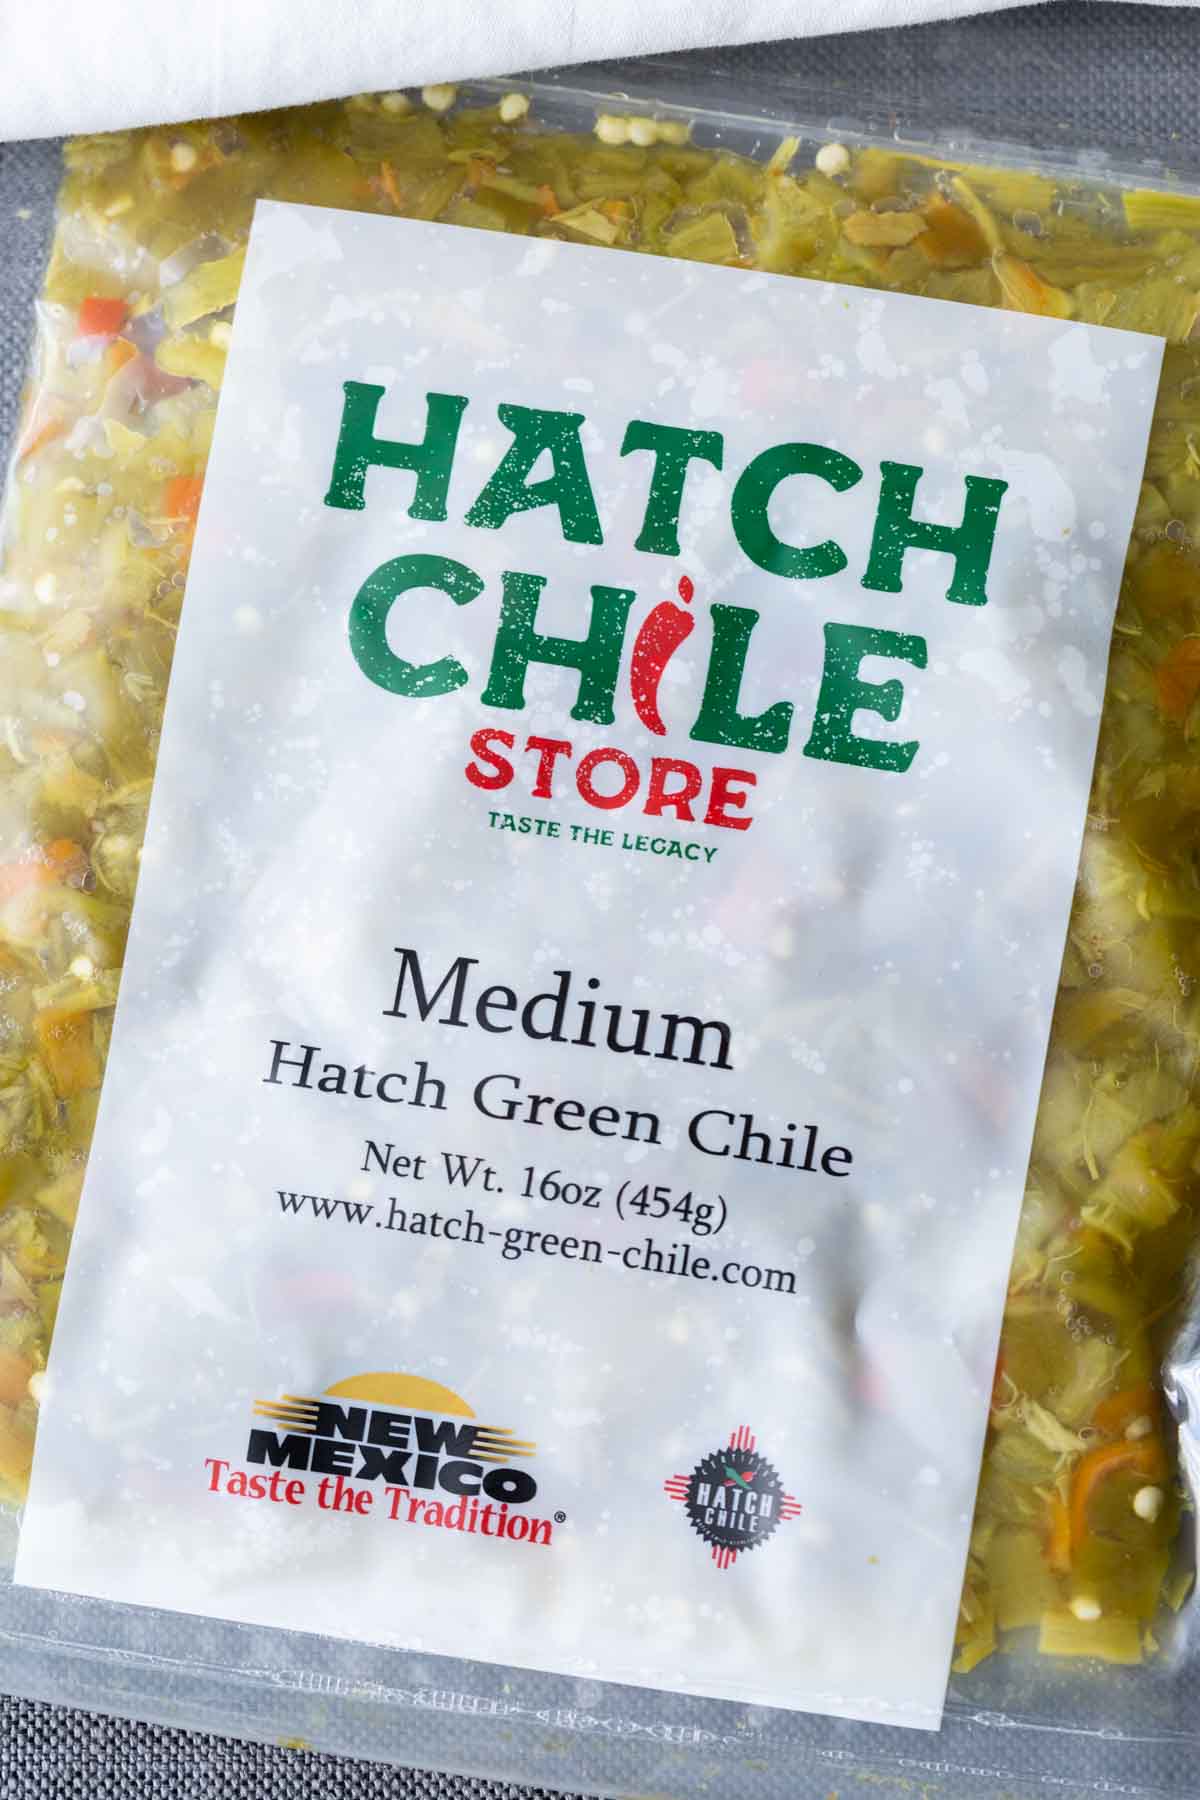 Hatch chiles in a bag